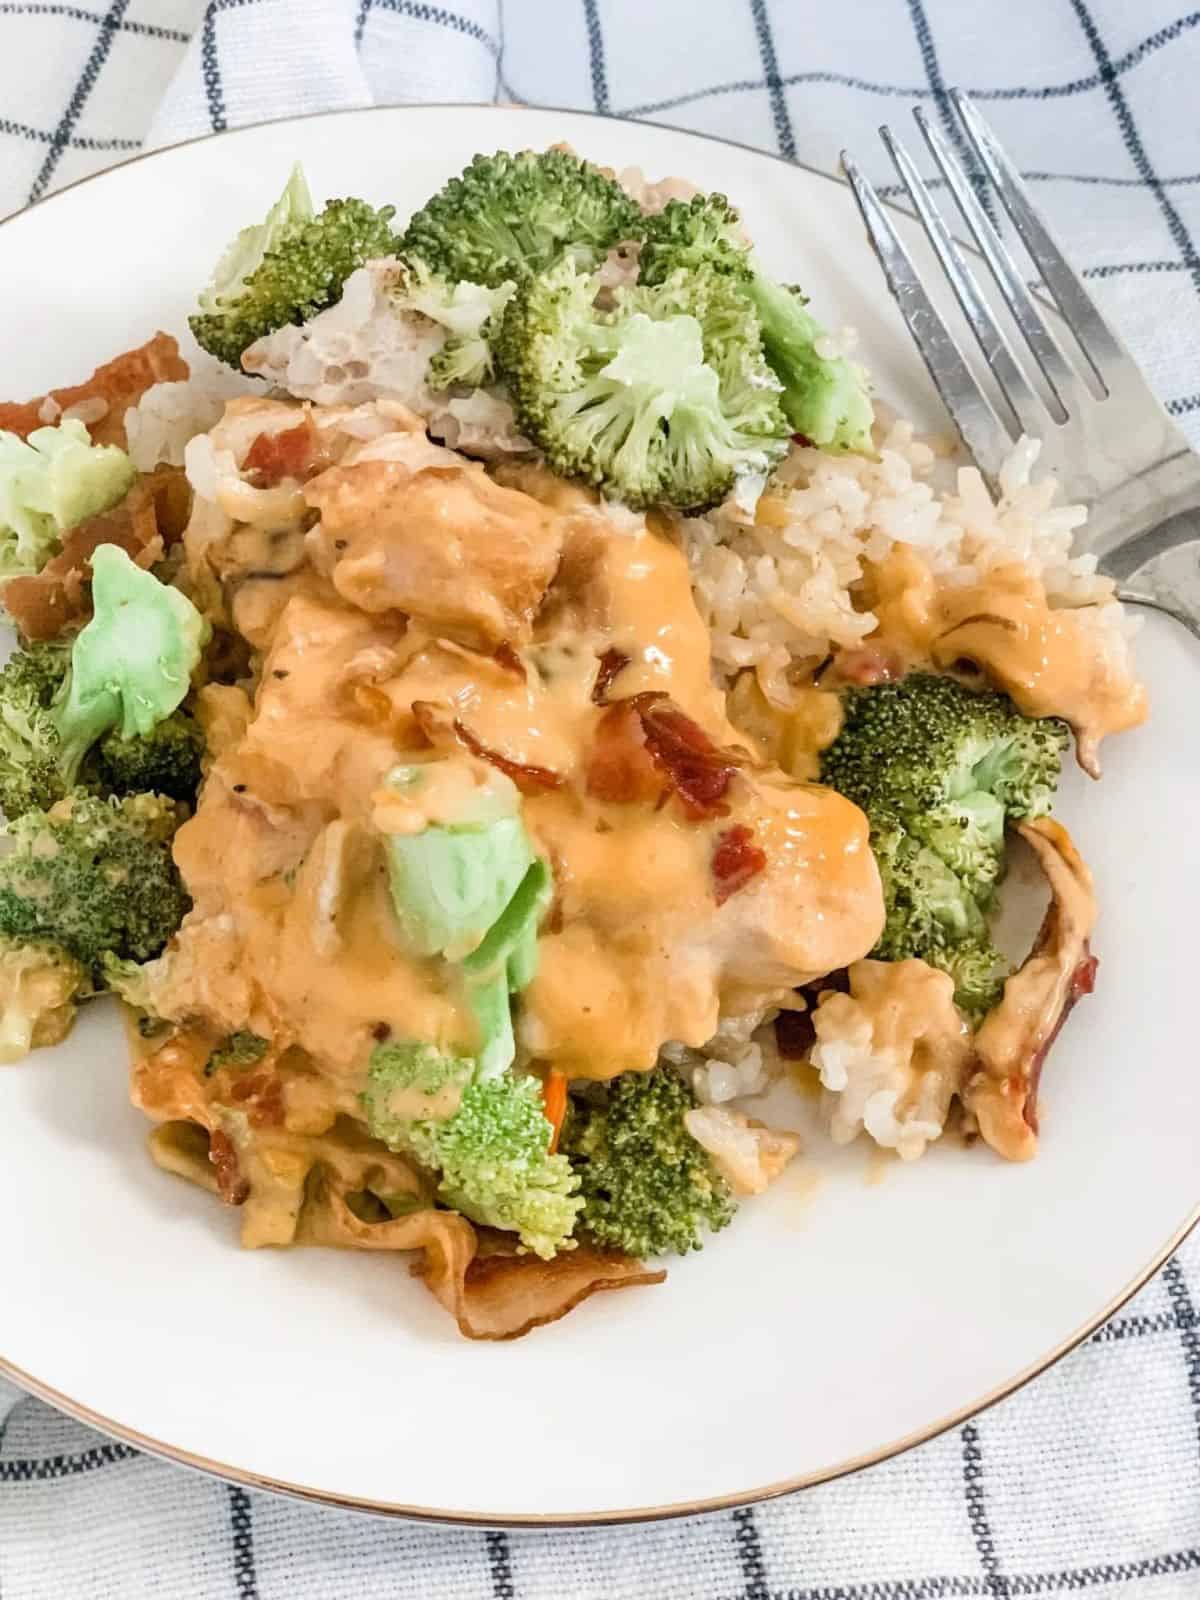 S plate featuring chicken, broccoli, cheese, and rice.